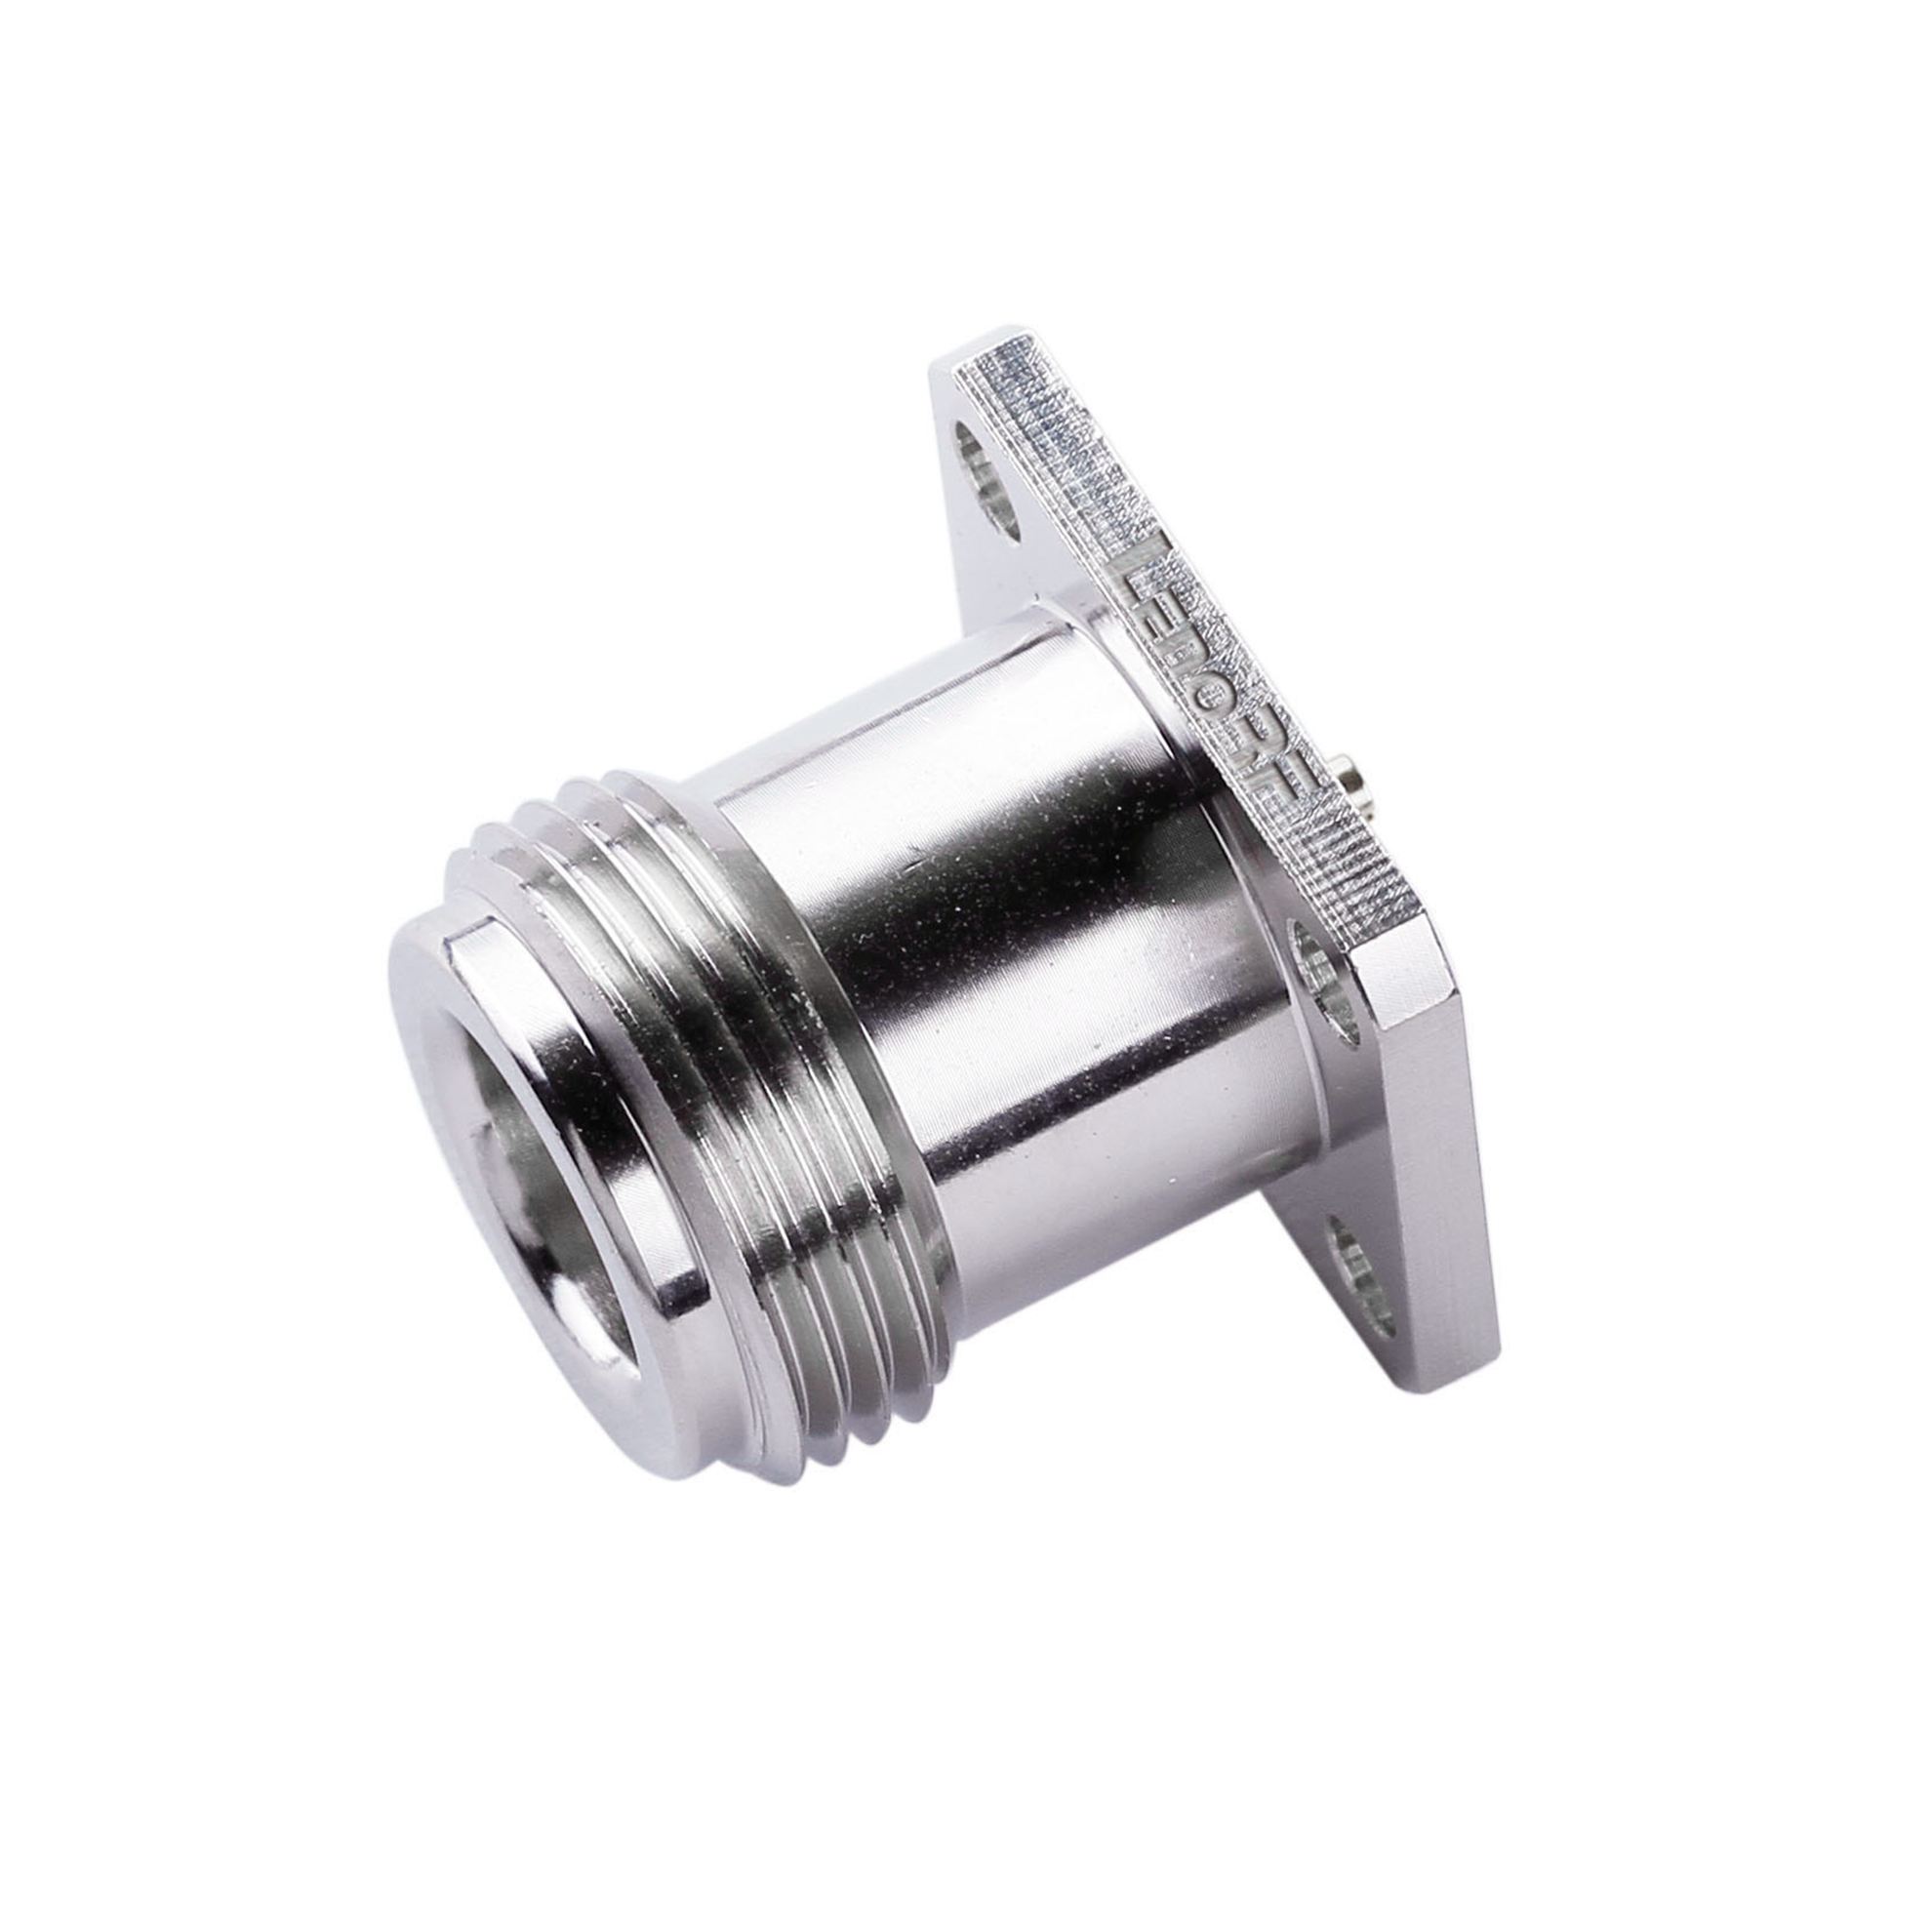 N Connector Jack 4 Hole Flange Straight For Microstrip